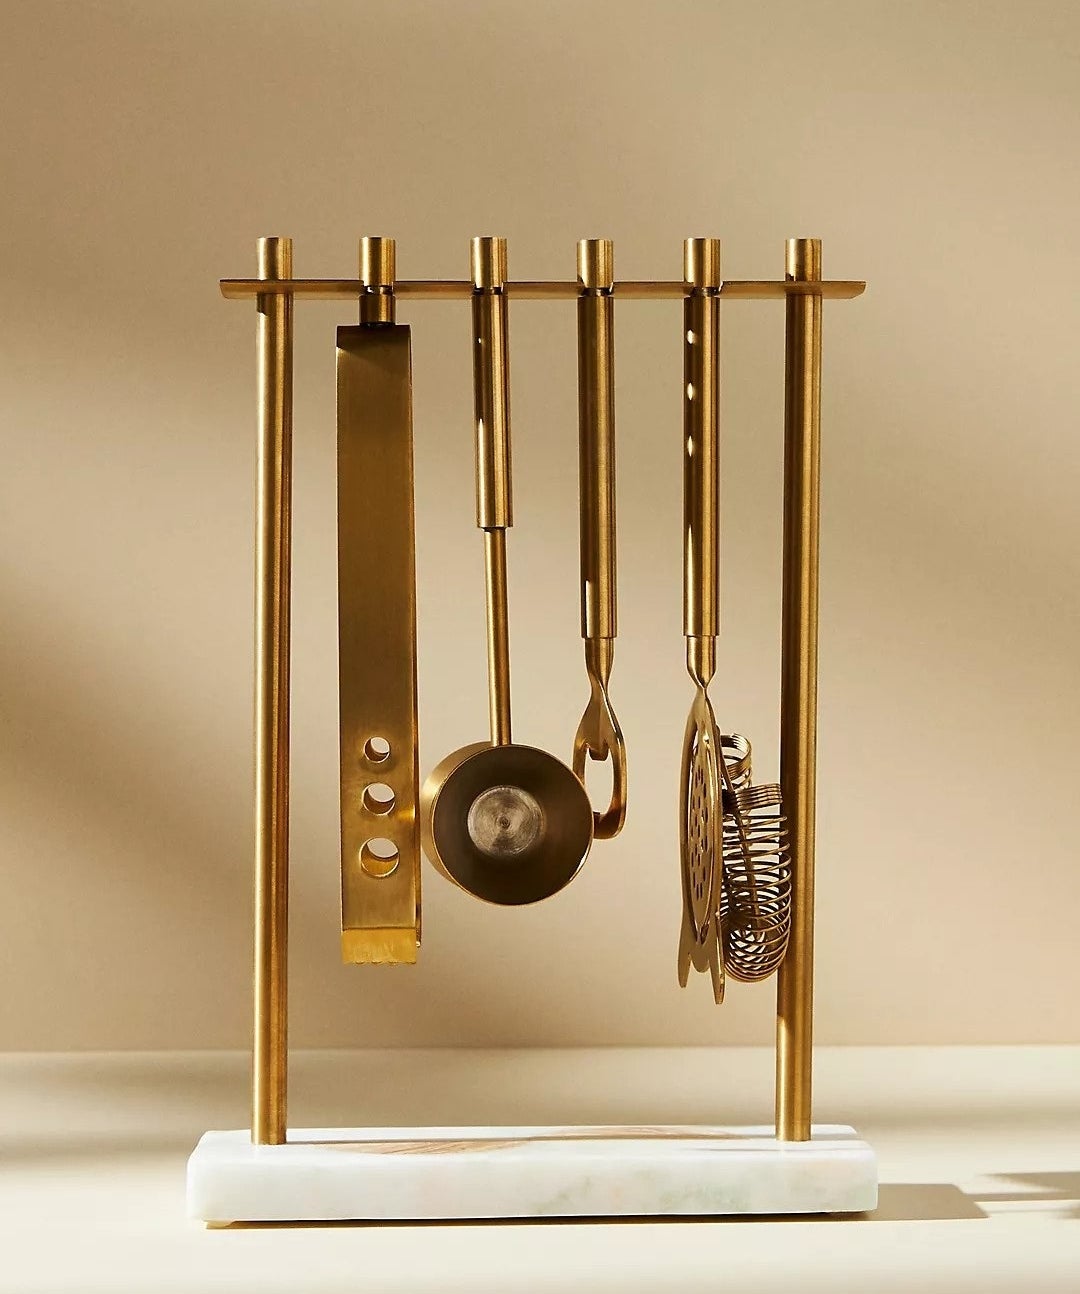 marble base and gold frame holding matching gold bar tools